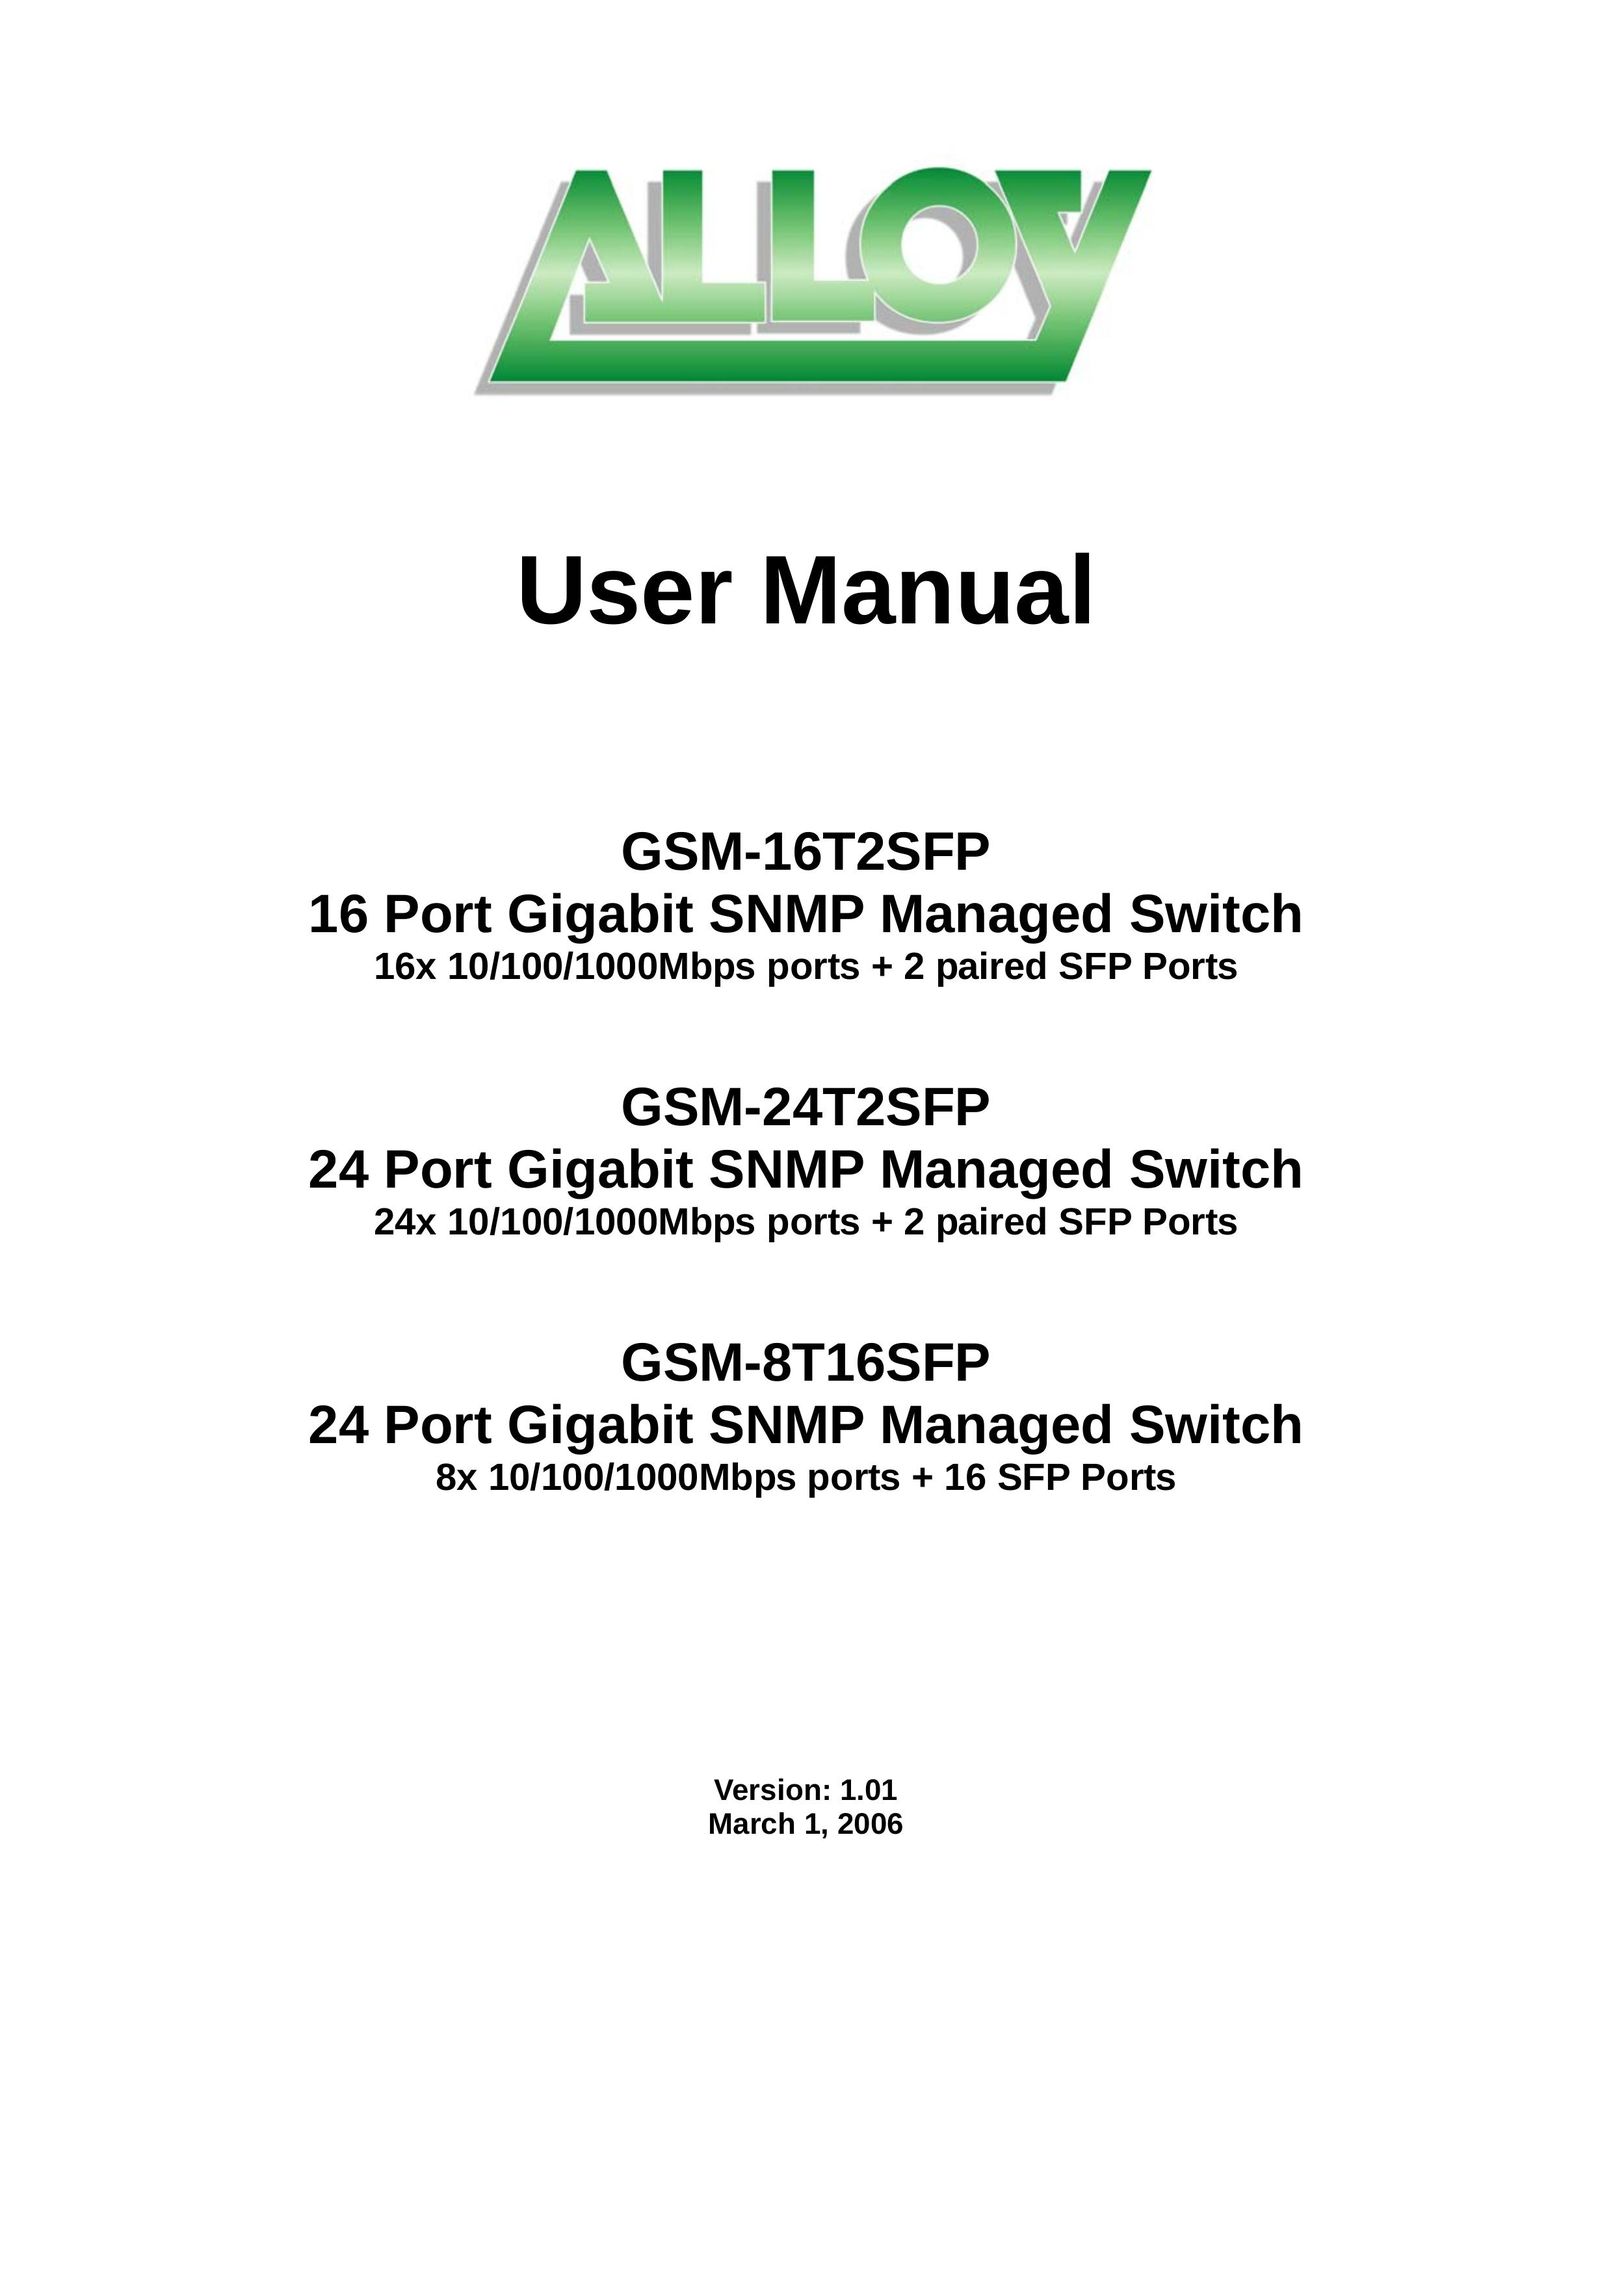 Alloy Computer Products GSM-8T16SFP Switch User Manual